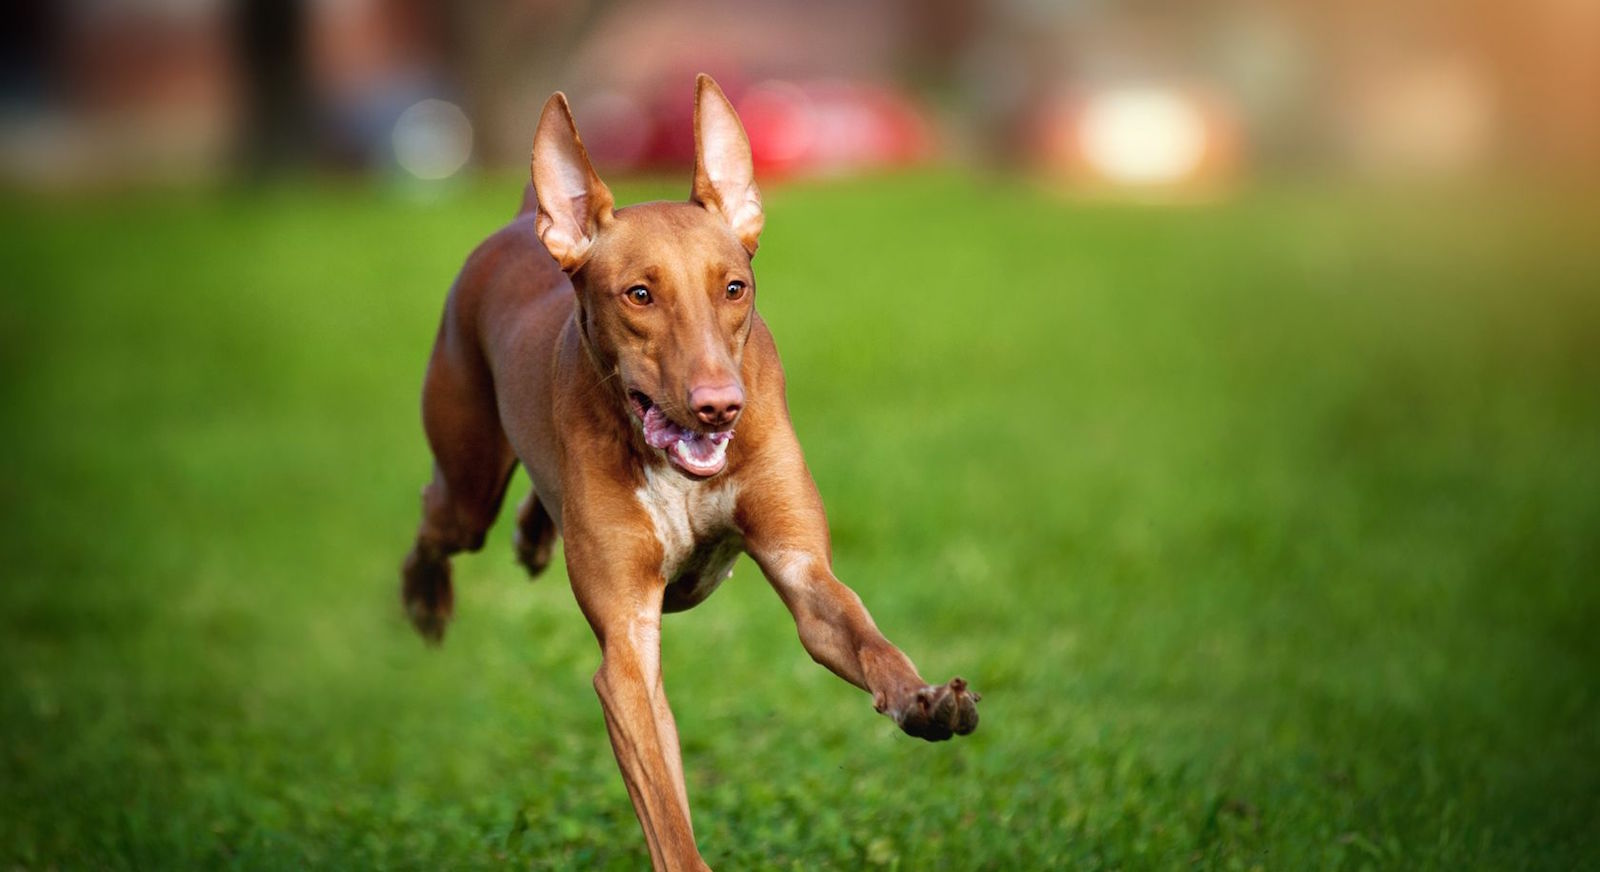 5 Things To Know About Pharaoh Hounds